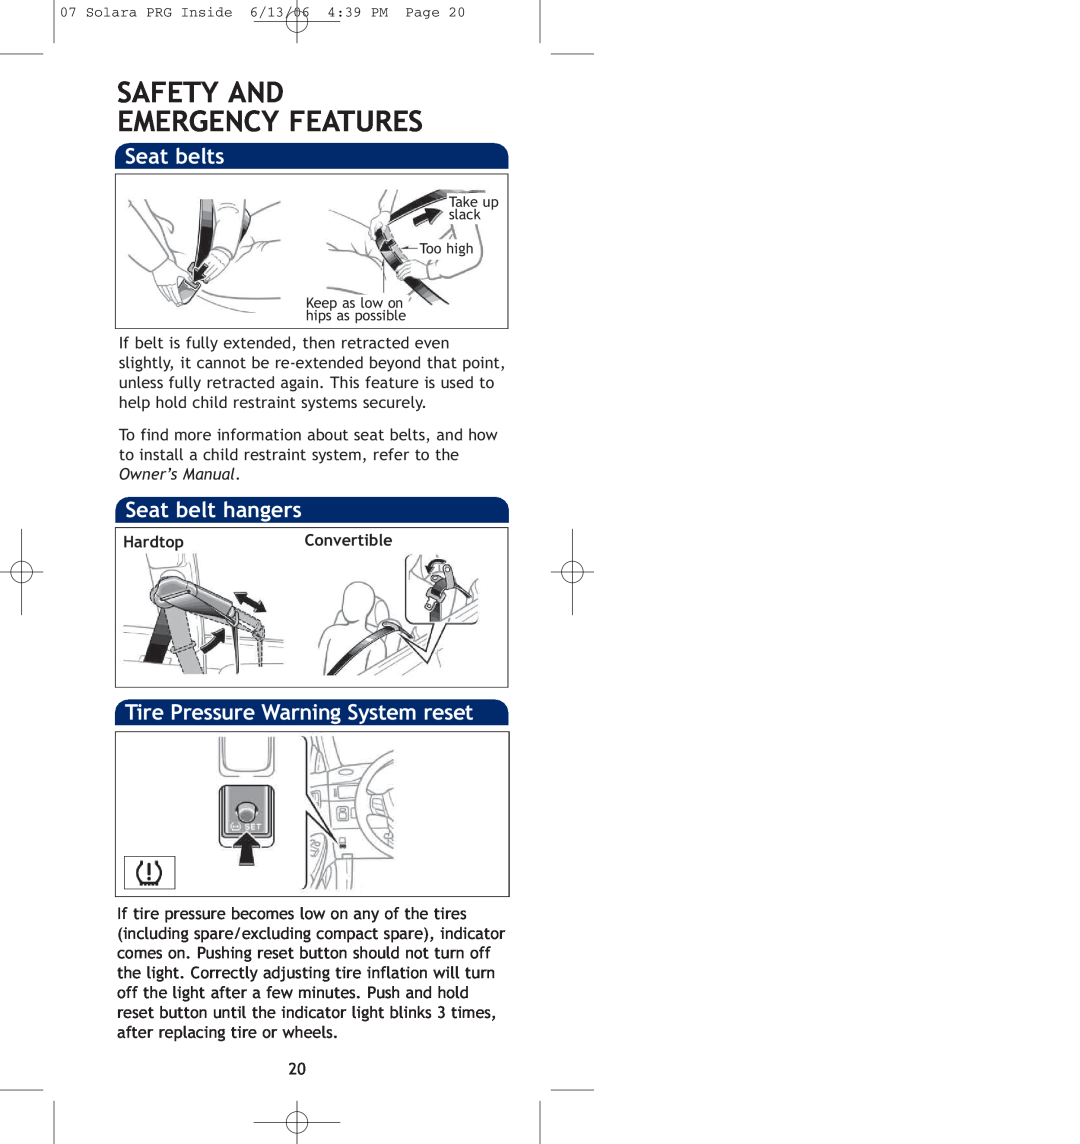 Toyota 00452-PRG07-SOL manual Safety And Emergency Features, HardtopConvertible 